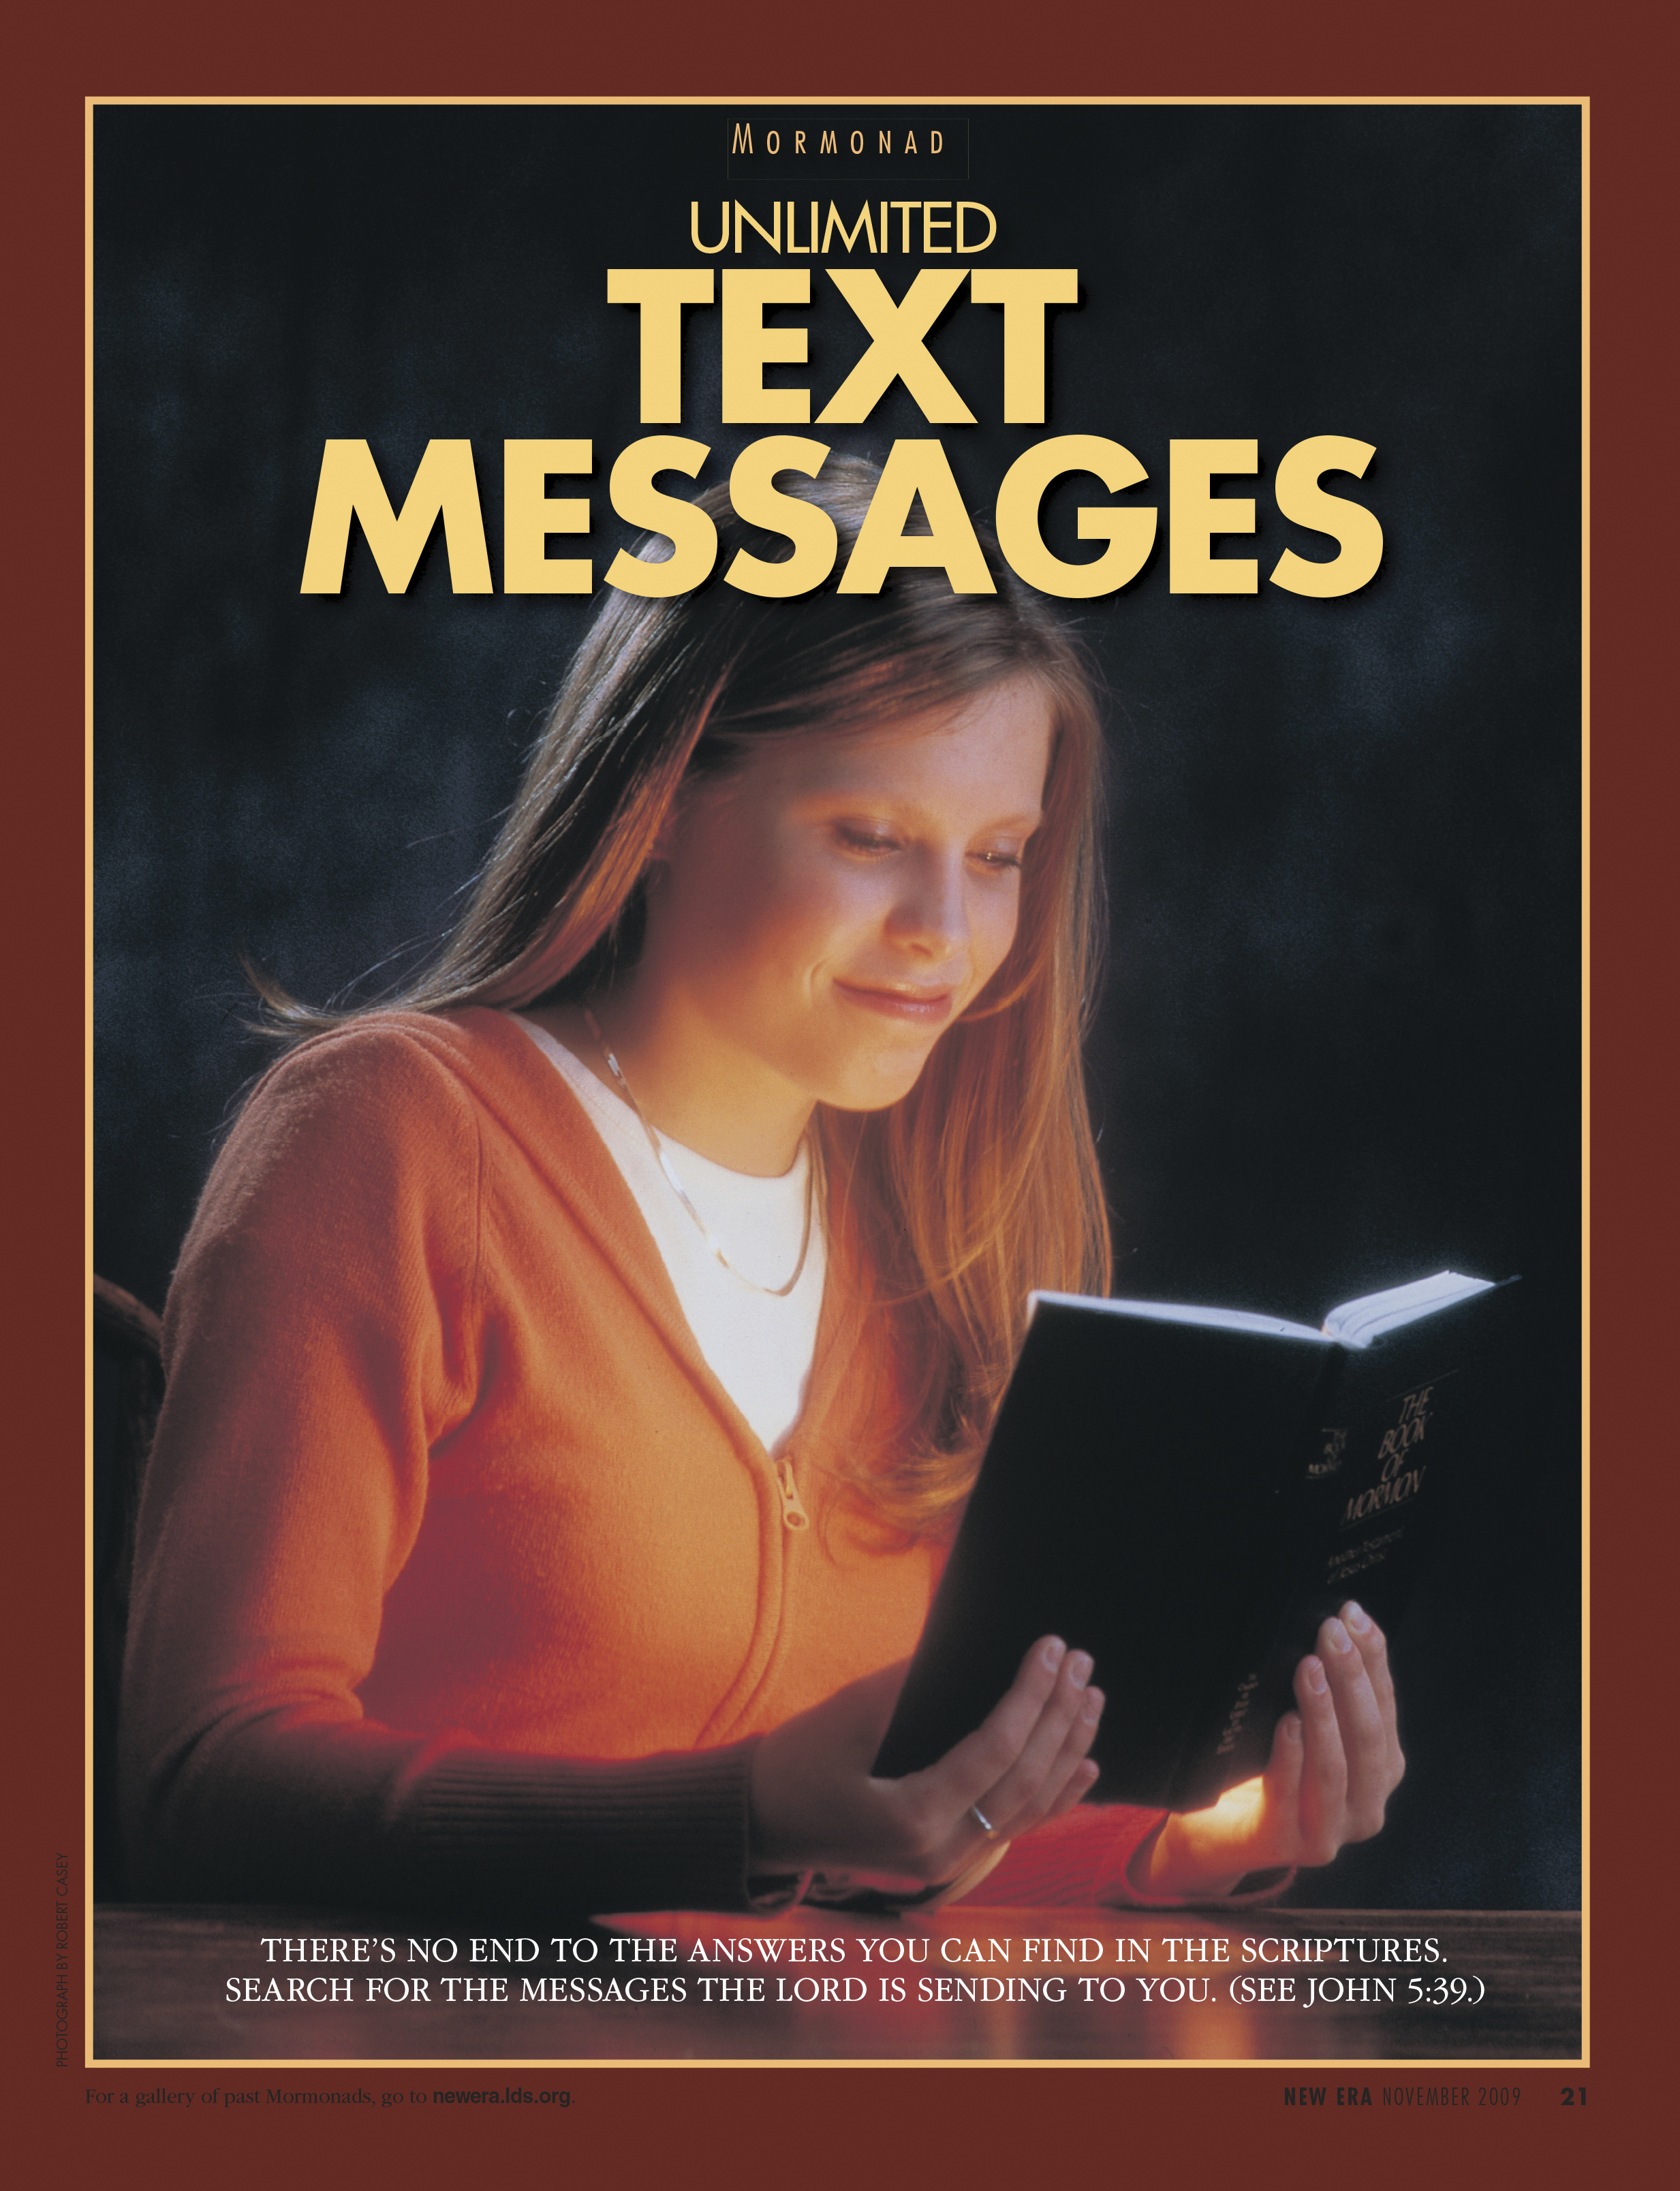 Unlimited Text Messages. There’s no end to the answers you can find in the scriptures. Search for the messages the Lord is sending to you. (See John 5:39.) Nov. 2009 © undefined ipCode 1.